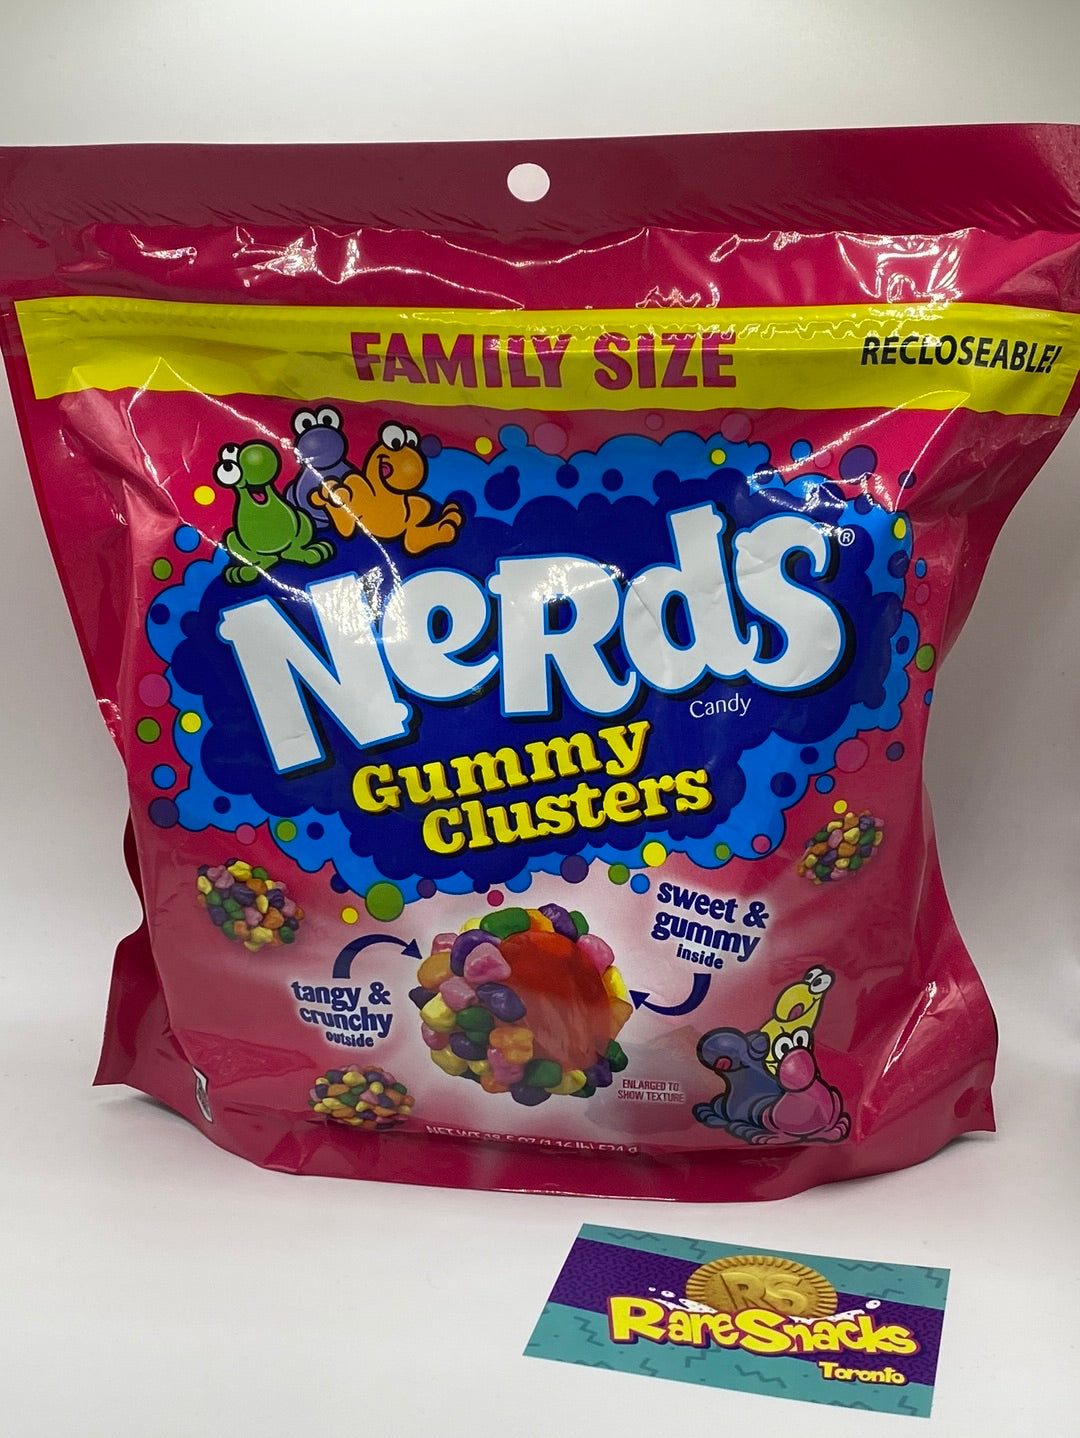 Nerds Gummy Clusters Family Size 1.16LB